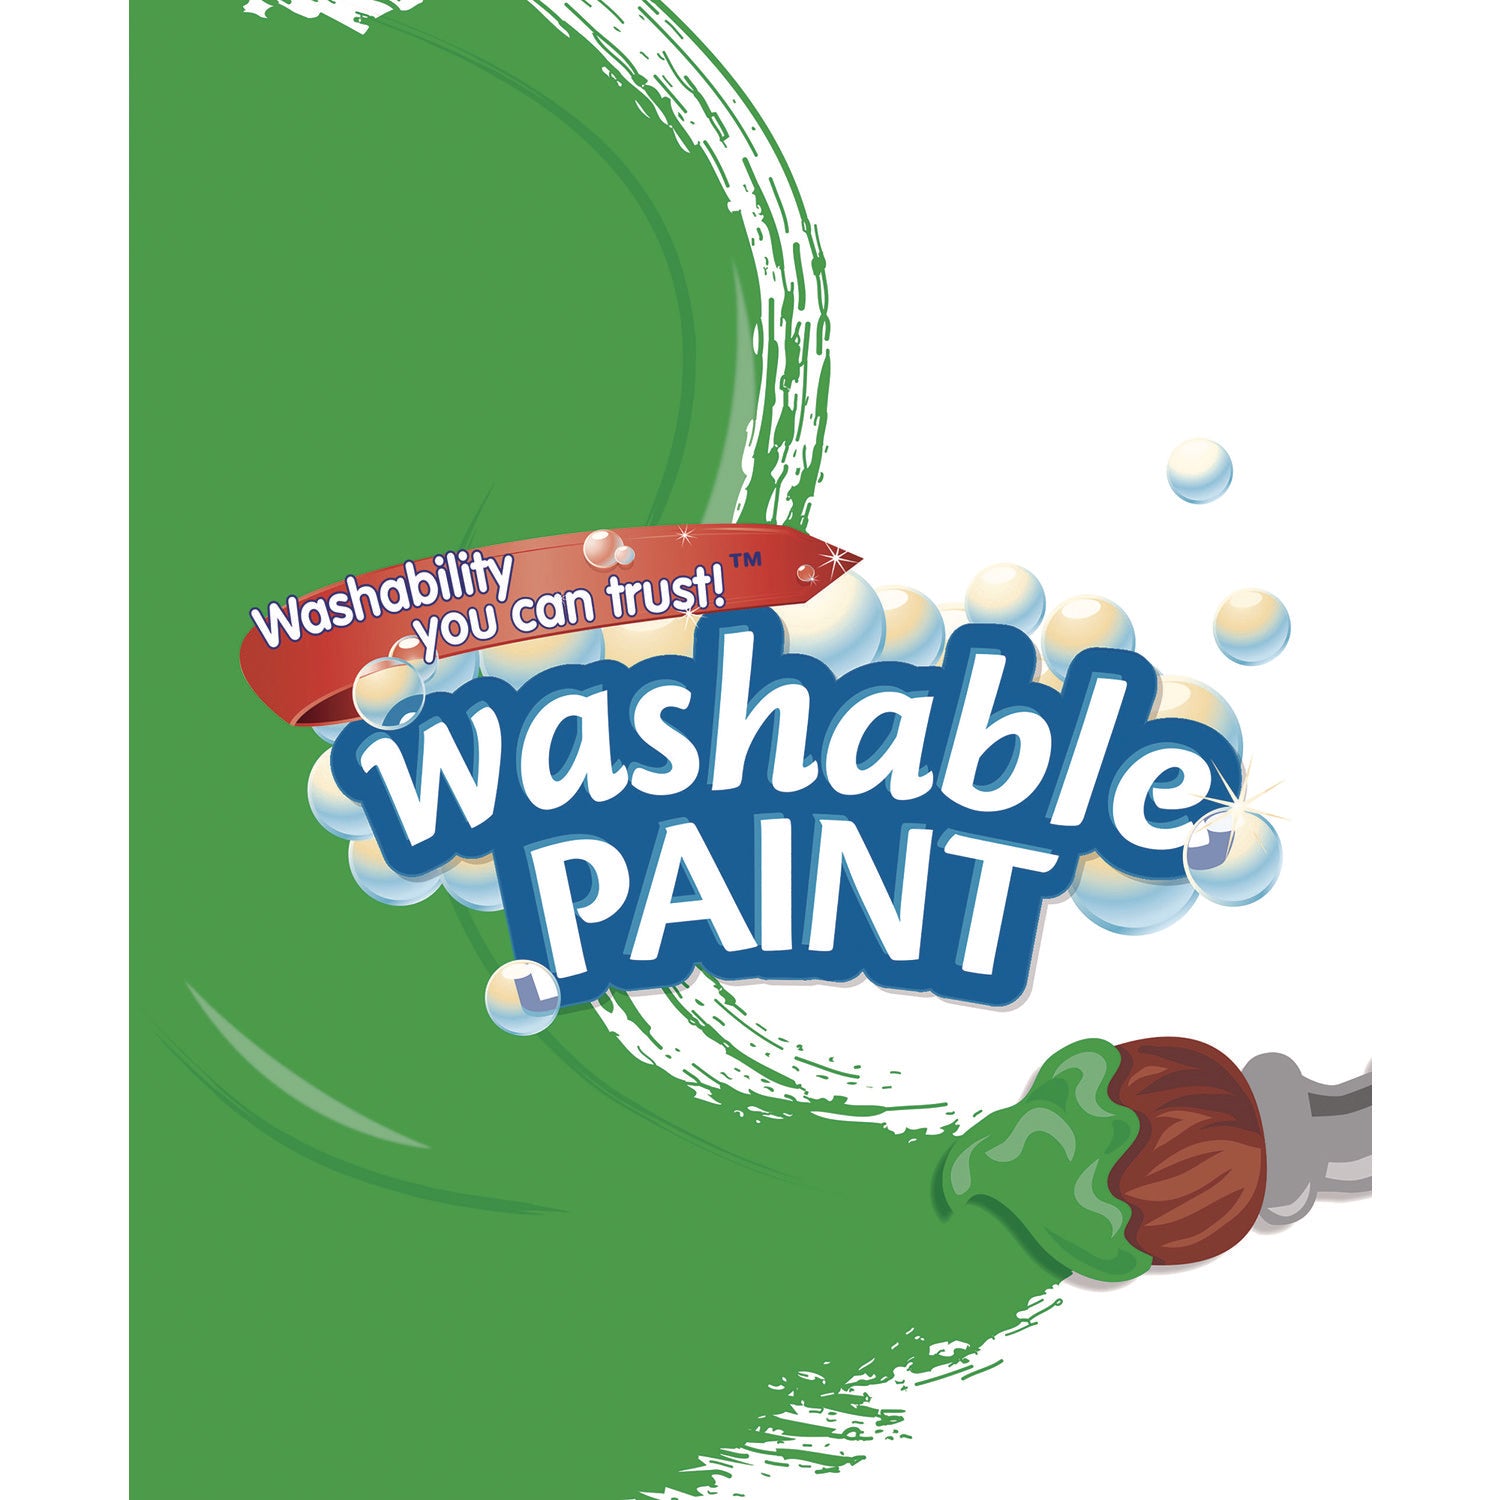 Washable Paint, Green, 1 gal Bottle - 